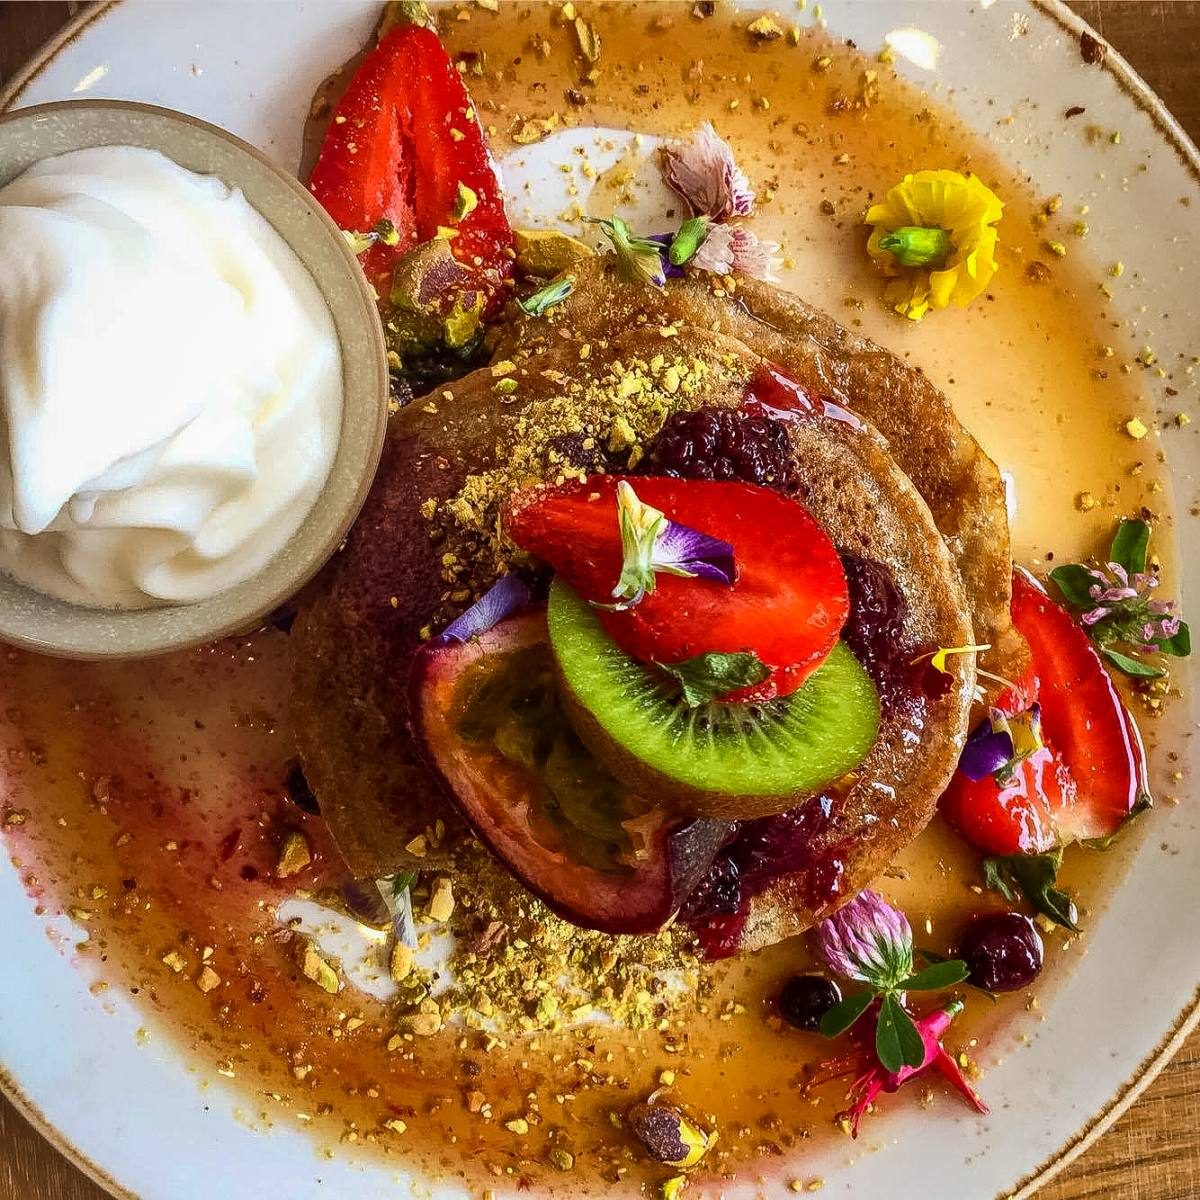 Gourmet pancakes adorned with fresh fruit and edible flowers, showcasing the culinary delights awaiting those moving to Sydney, Australia.